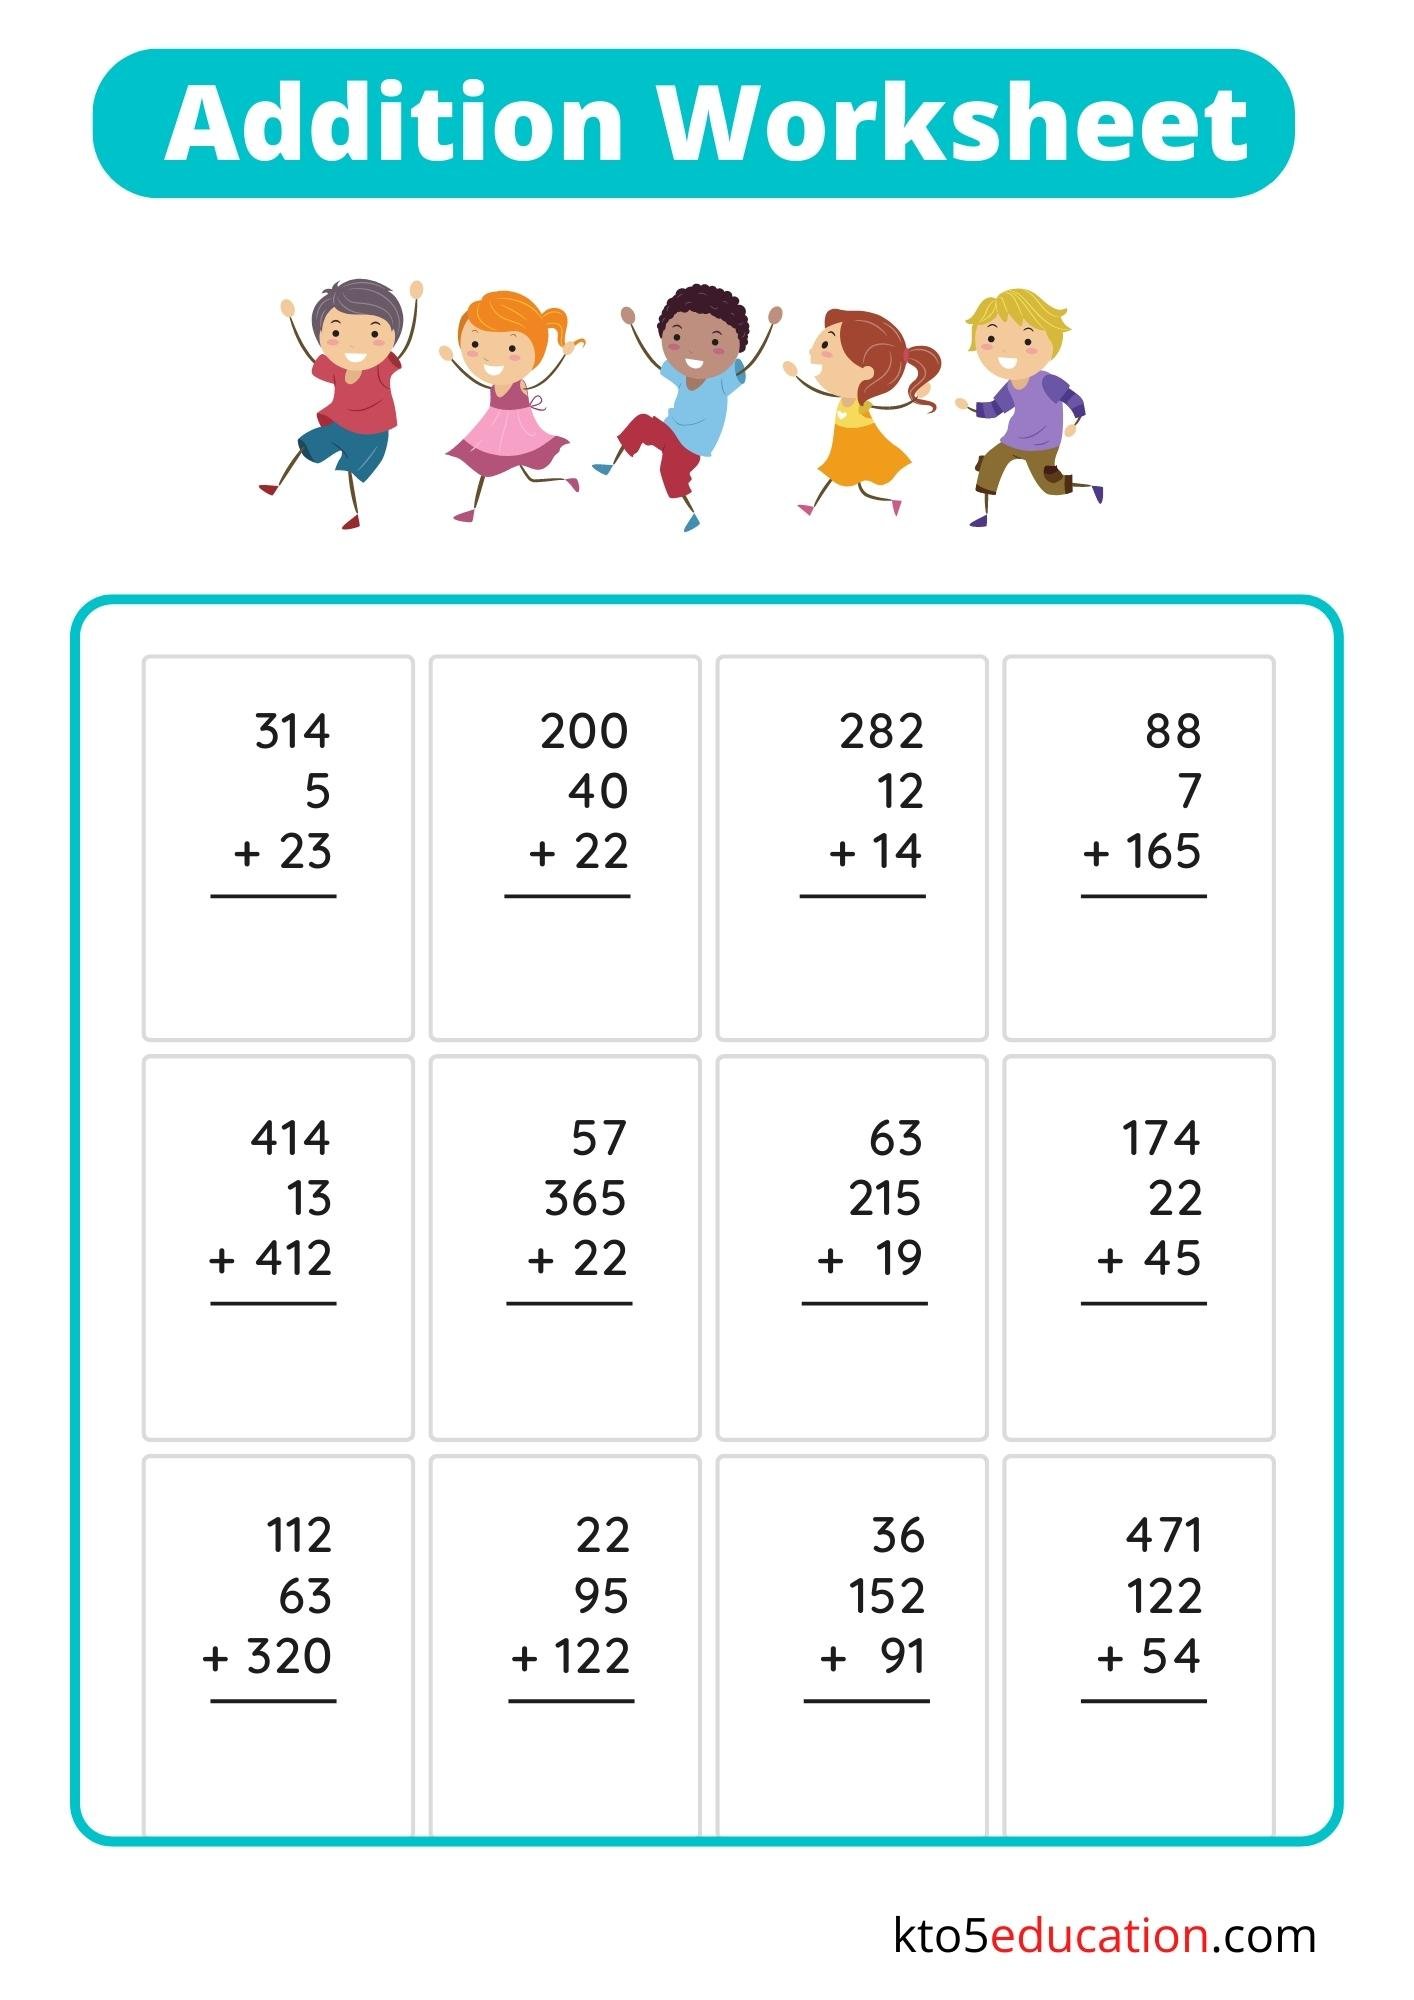 Addition Fact Practice Worksheet